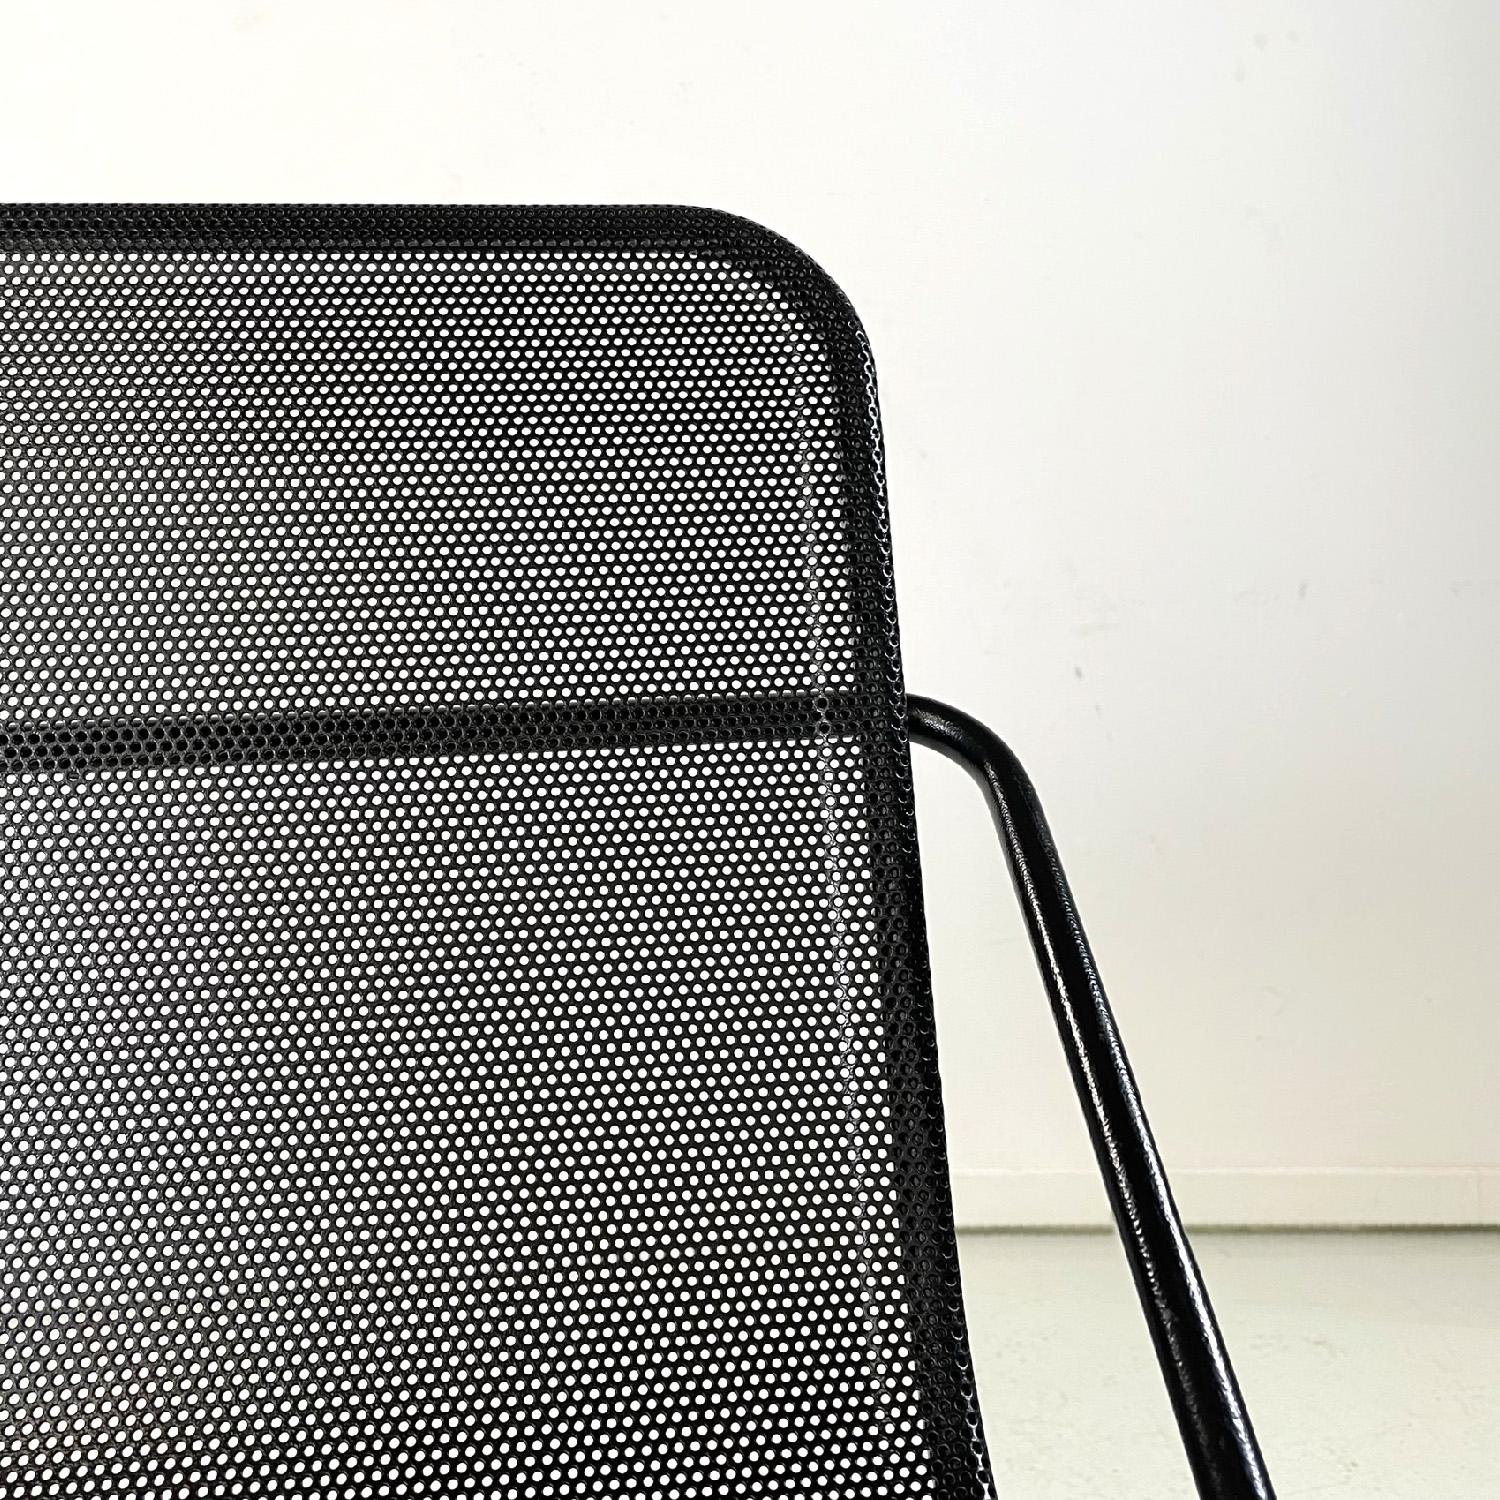 Italian modern metal rod and perforated metal sheet black metal chair, 1980s For Sale 4